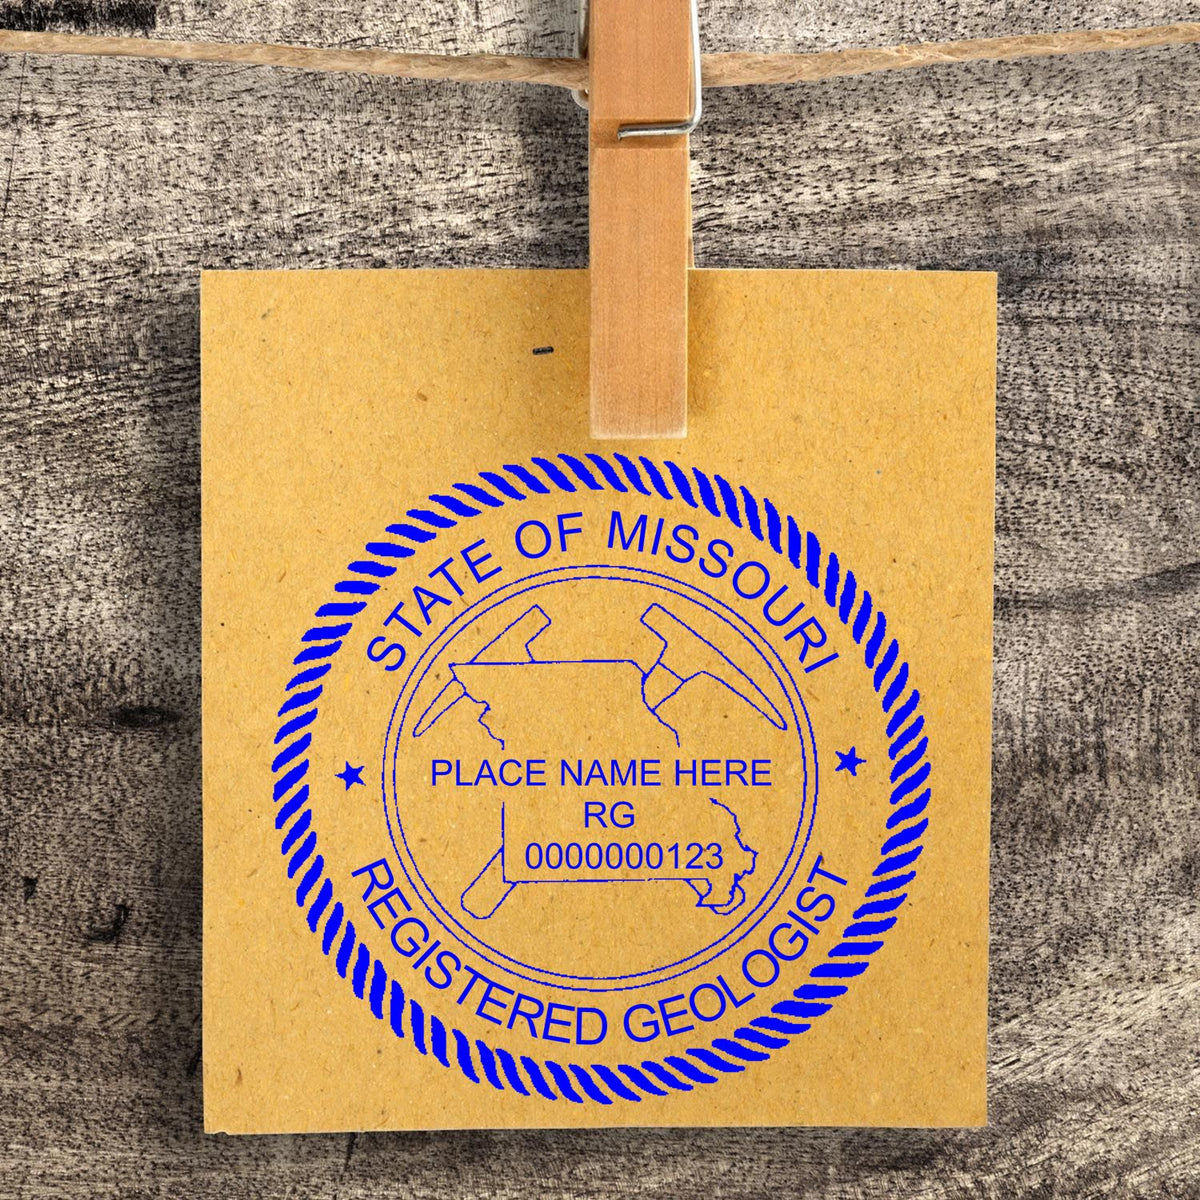 This paper is stamped with a sample imprint of the Self-Inking Missouri Geologist Stamp, signifying its quality and reliability.